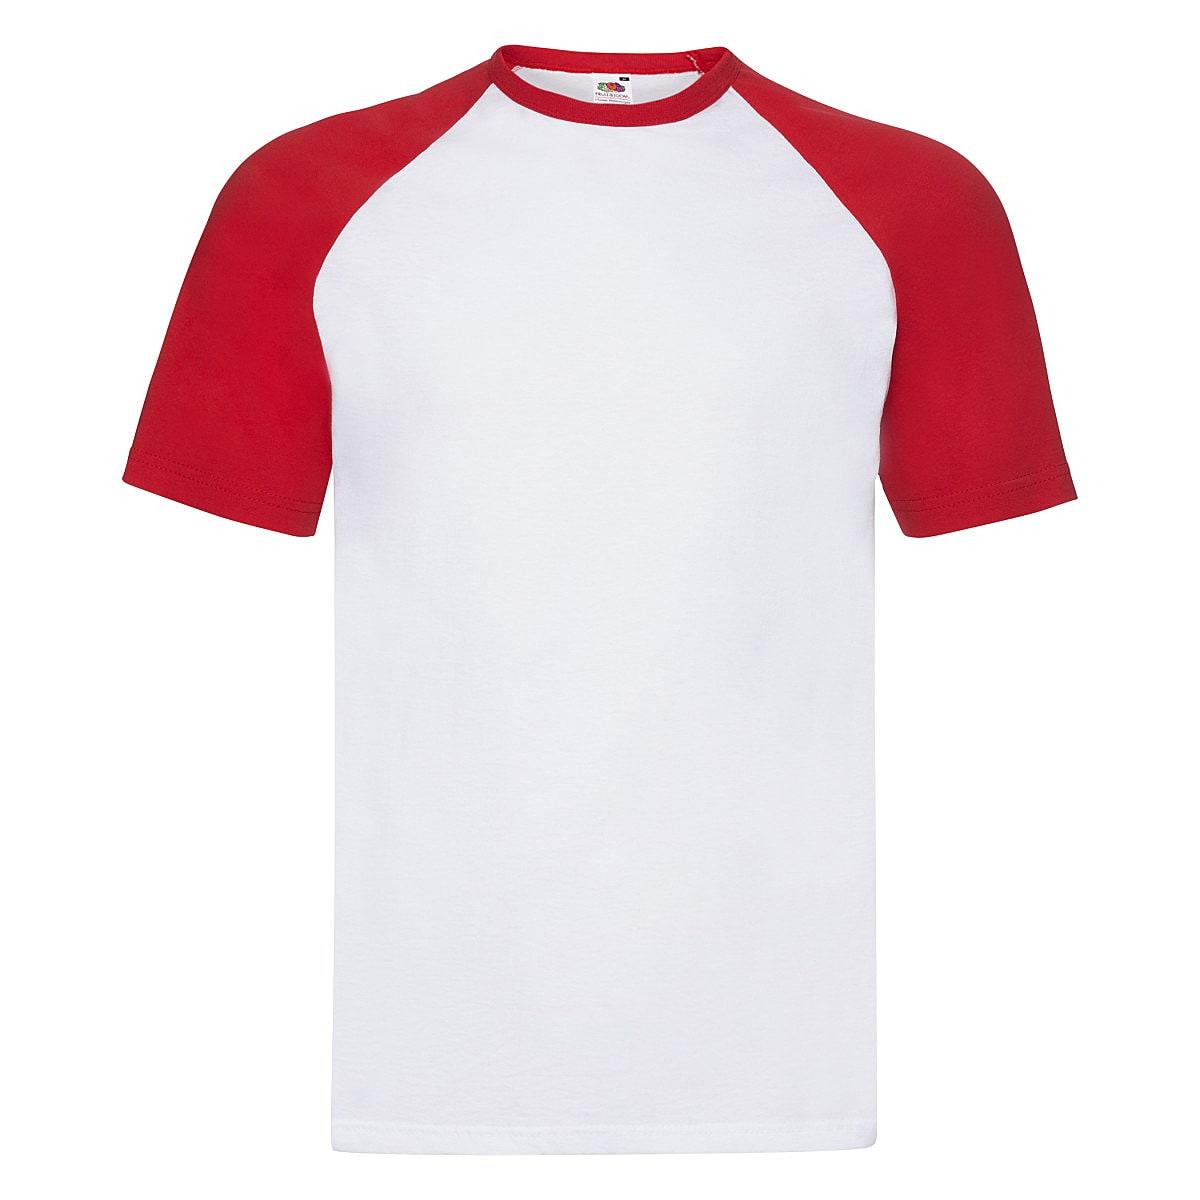 Fruit Of The Loom Short-Sleeve Baseball T-Shirt in White / Red (Product Code: 61026)